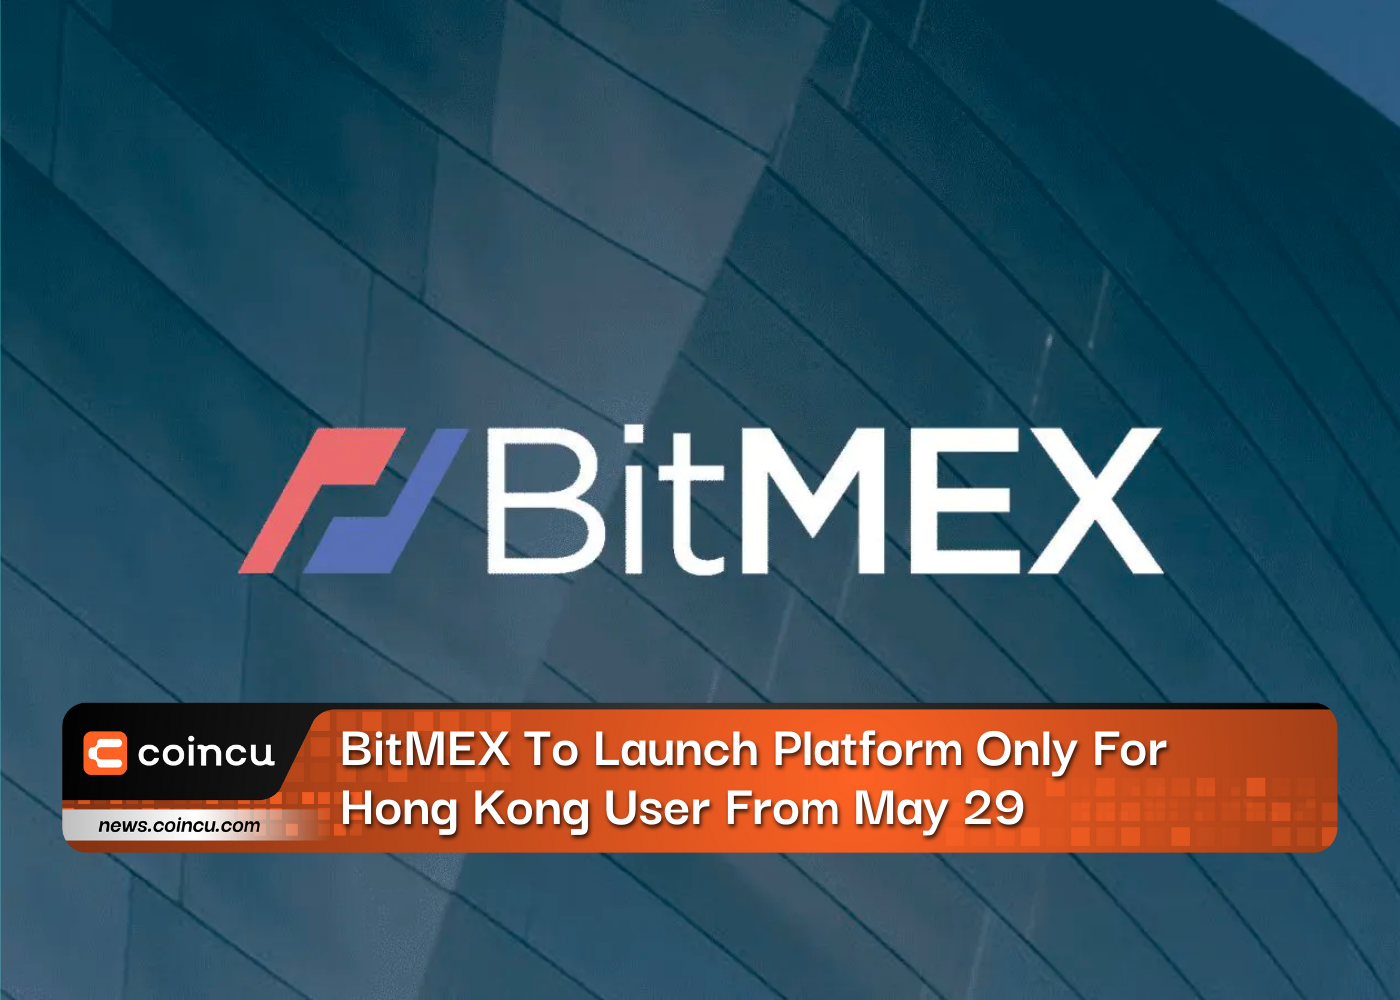 BitMEX To Launch Platform Only For Hong Kong User From May 29